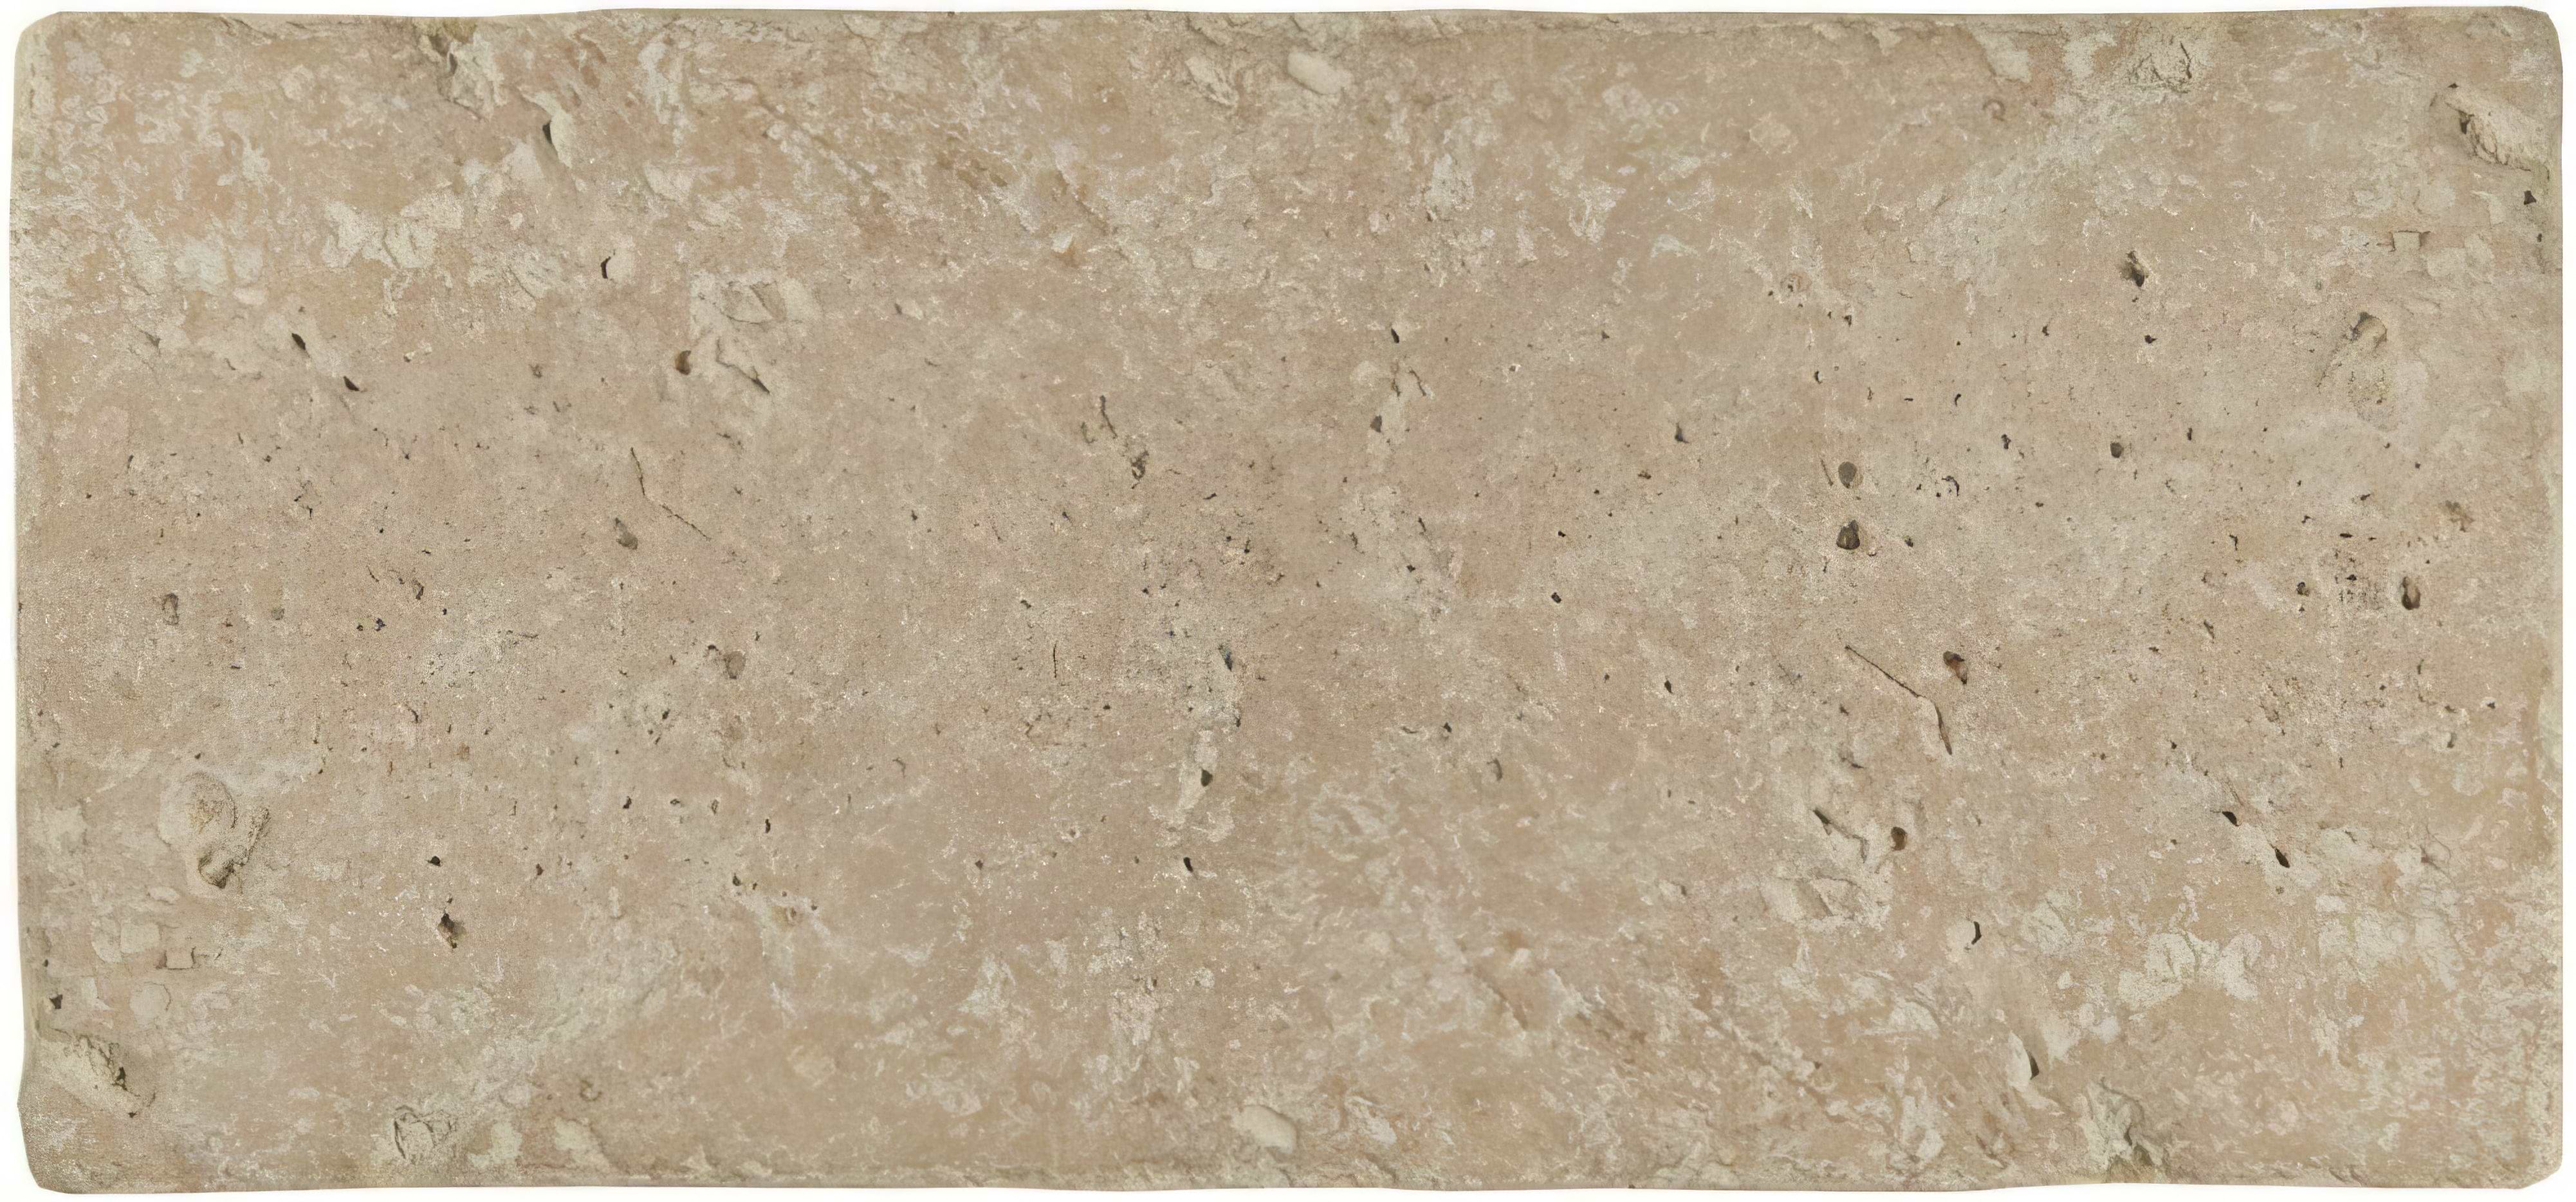 Levantine Ivory Unfilled & Tumbled Travertine 200 x 100mm - Hyperion Tiles